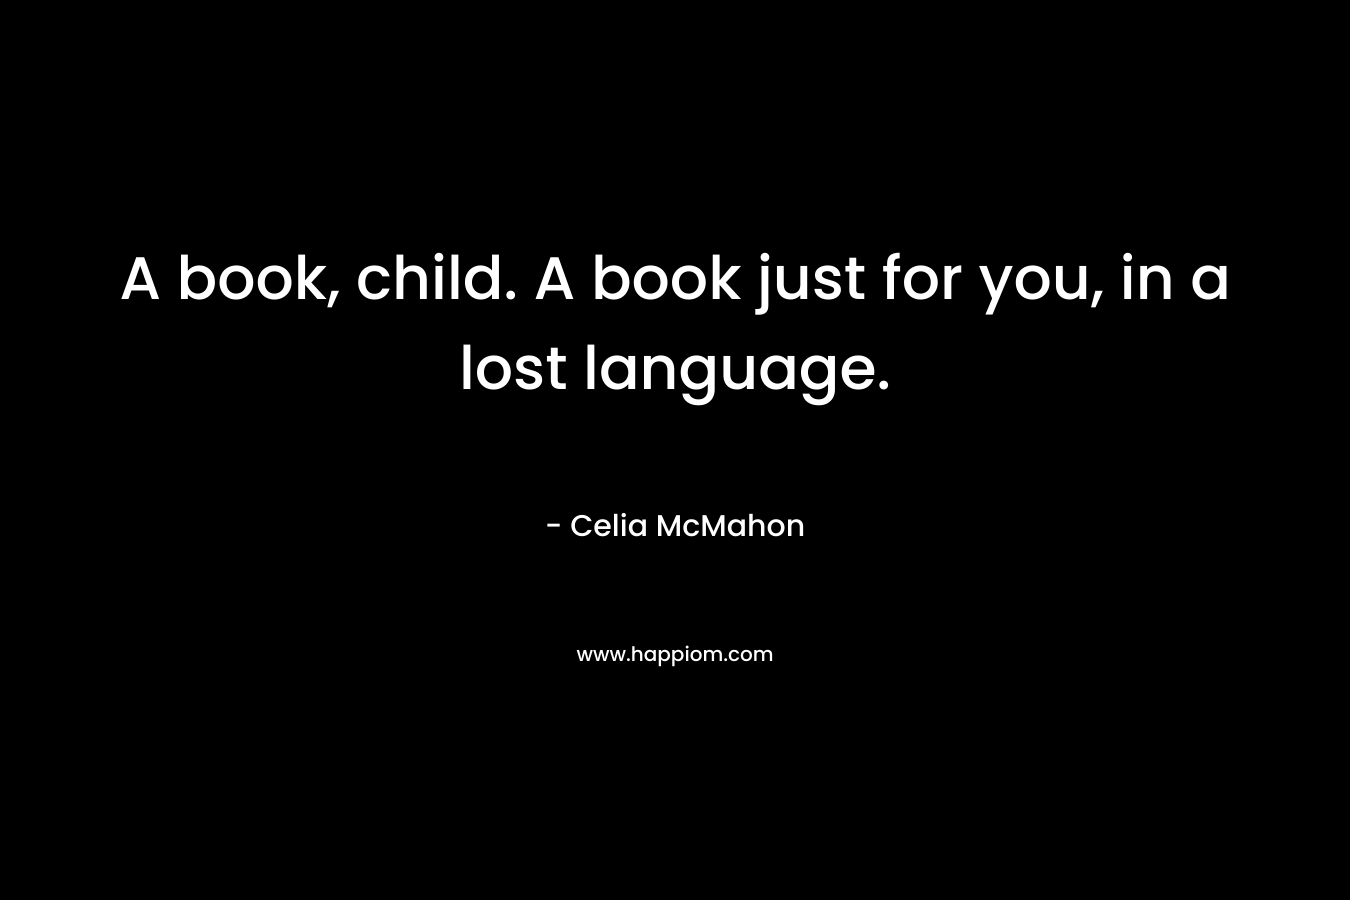 A book, child. A book just for you, in a lost language.